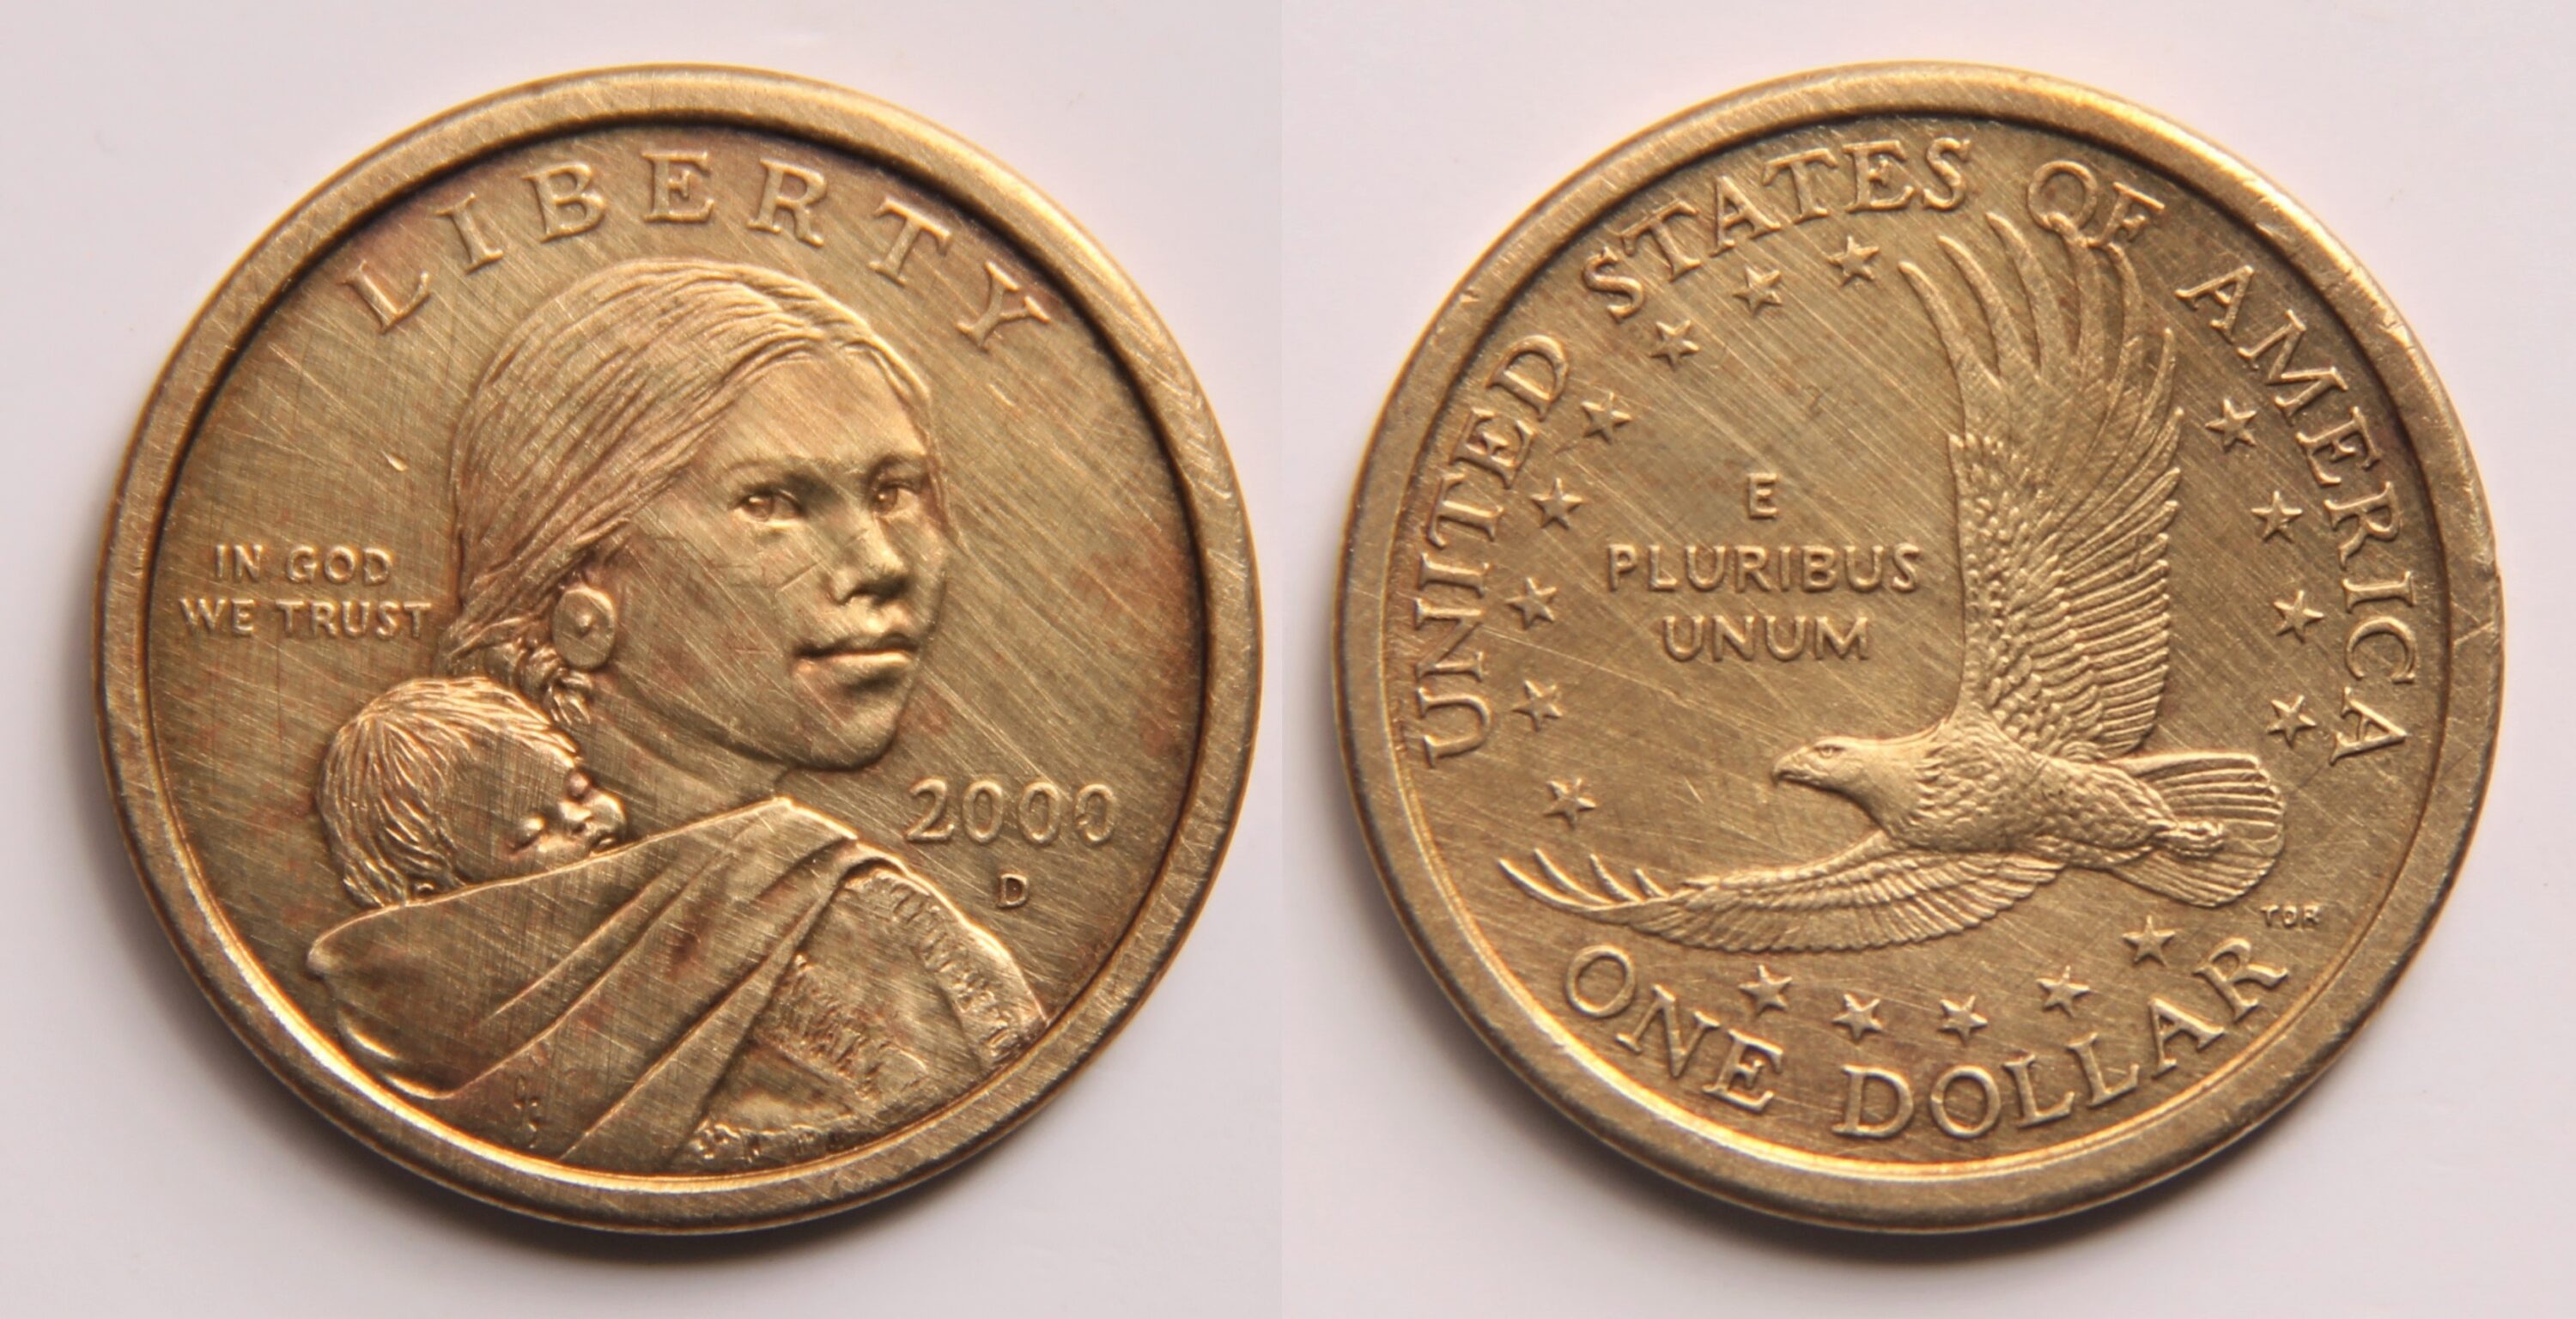 Front and back of 2000-era US dollar coin, featuring Sacagawea